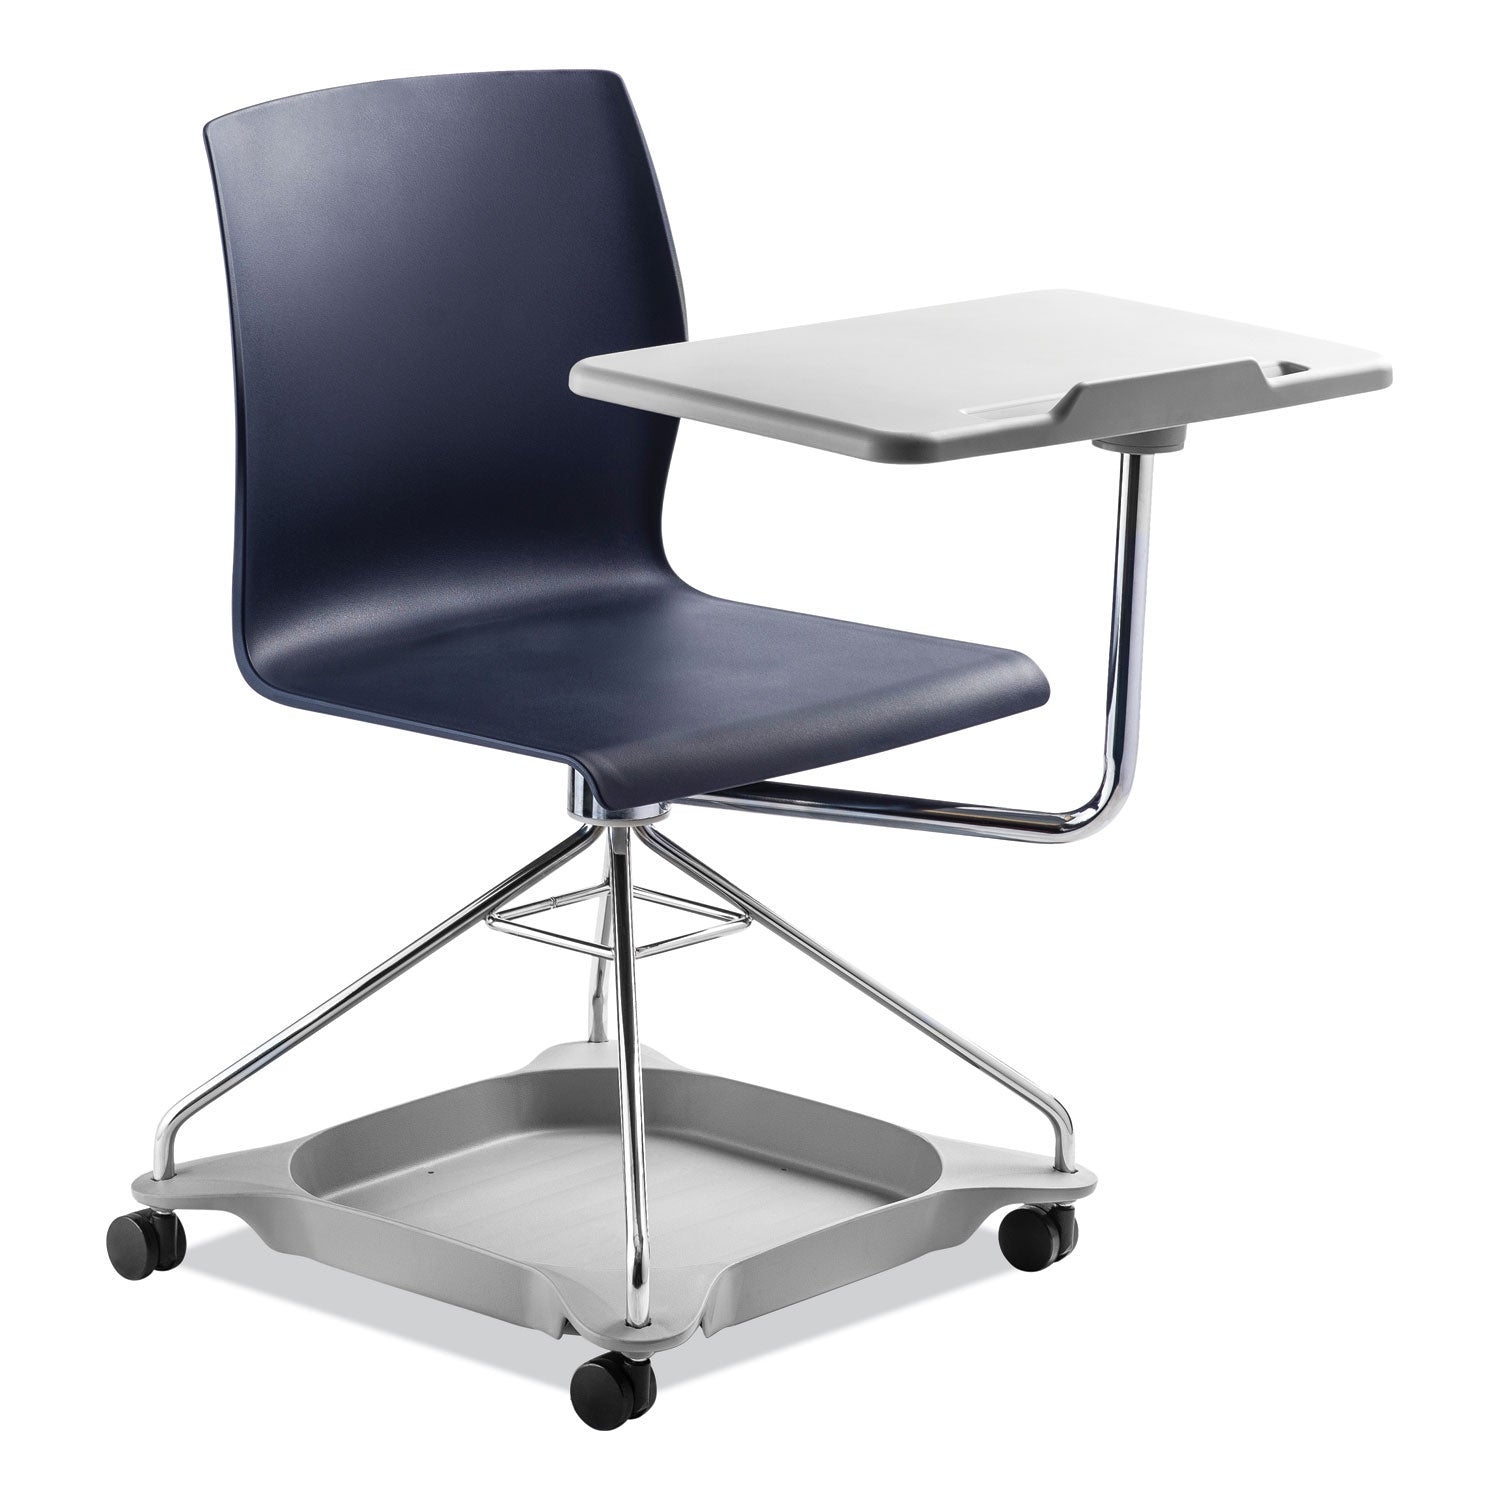 cogo-mobile-tablet-chair-supports-up-to-440-lb-1875-seat-height-blue-seat-back-chrome-frame-ships-in-1-3-business-days_npscogo04 - 1